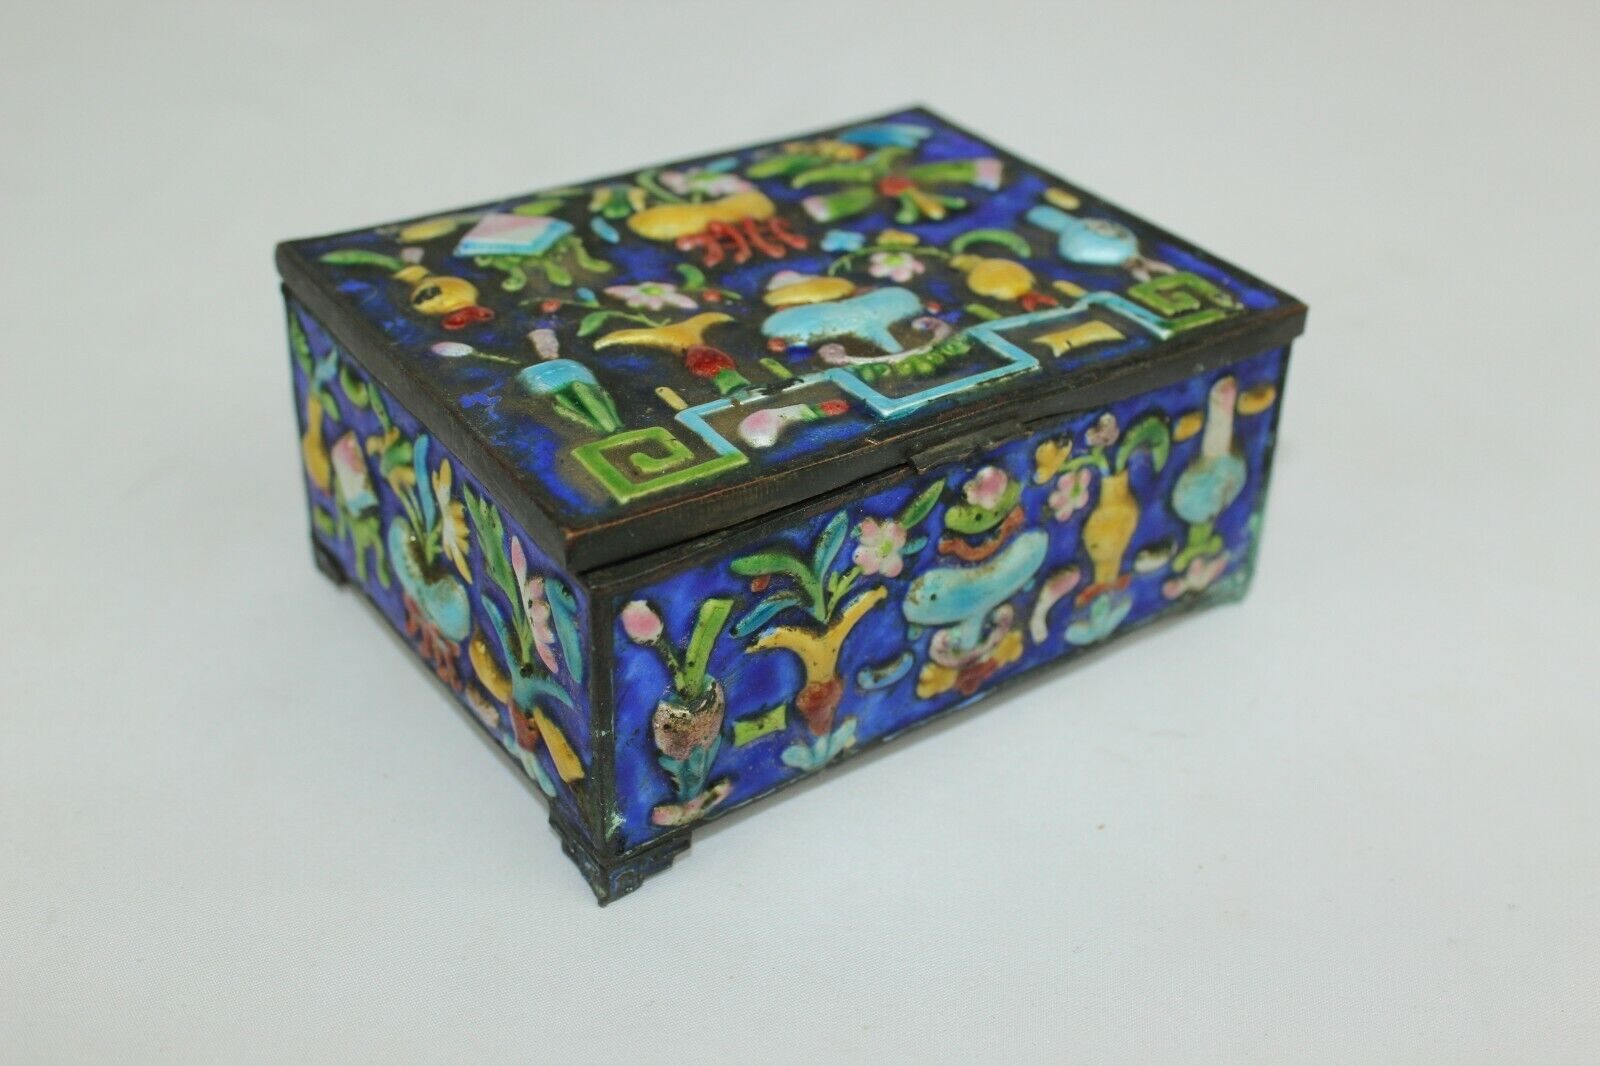 Vintage China Export Brass and Colored Enamel Wood Metal Box